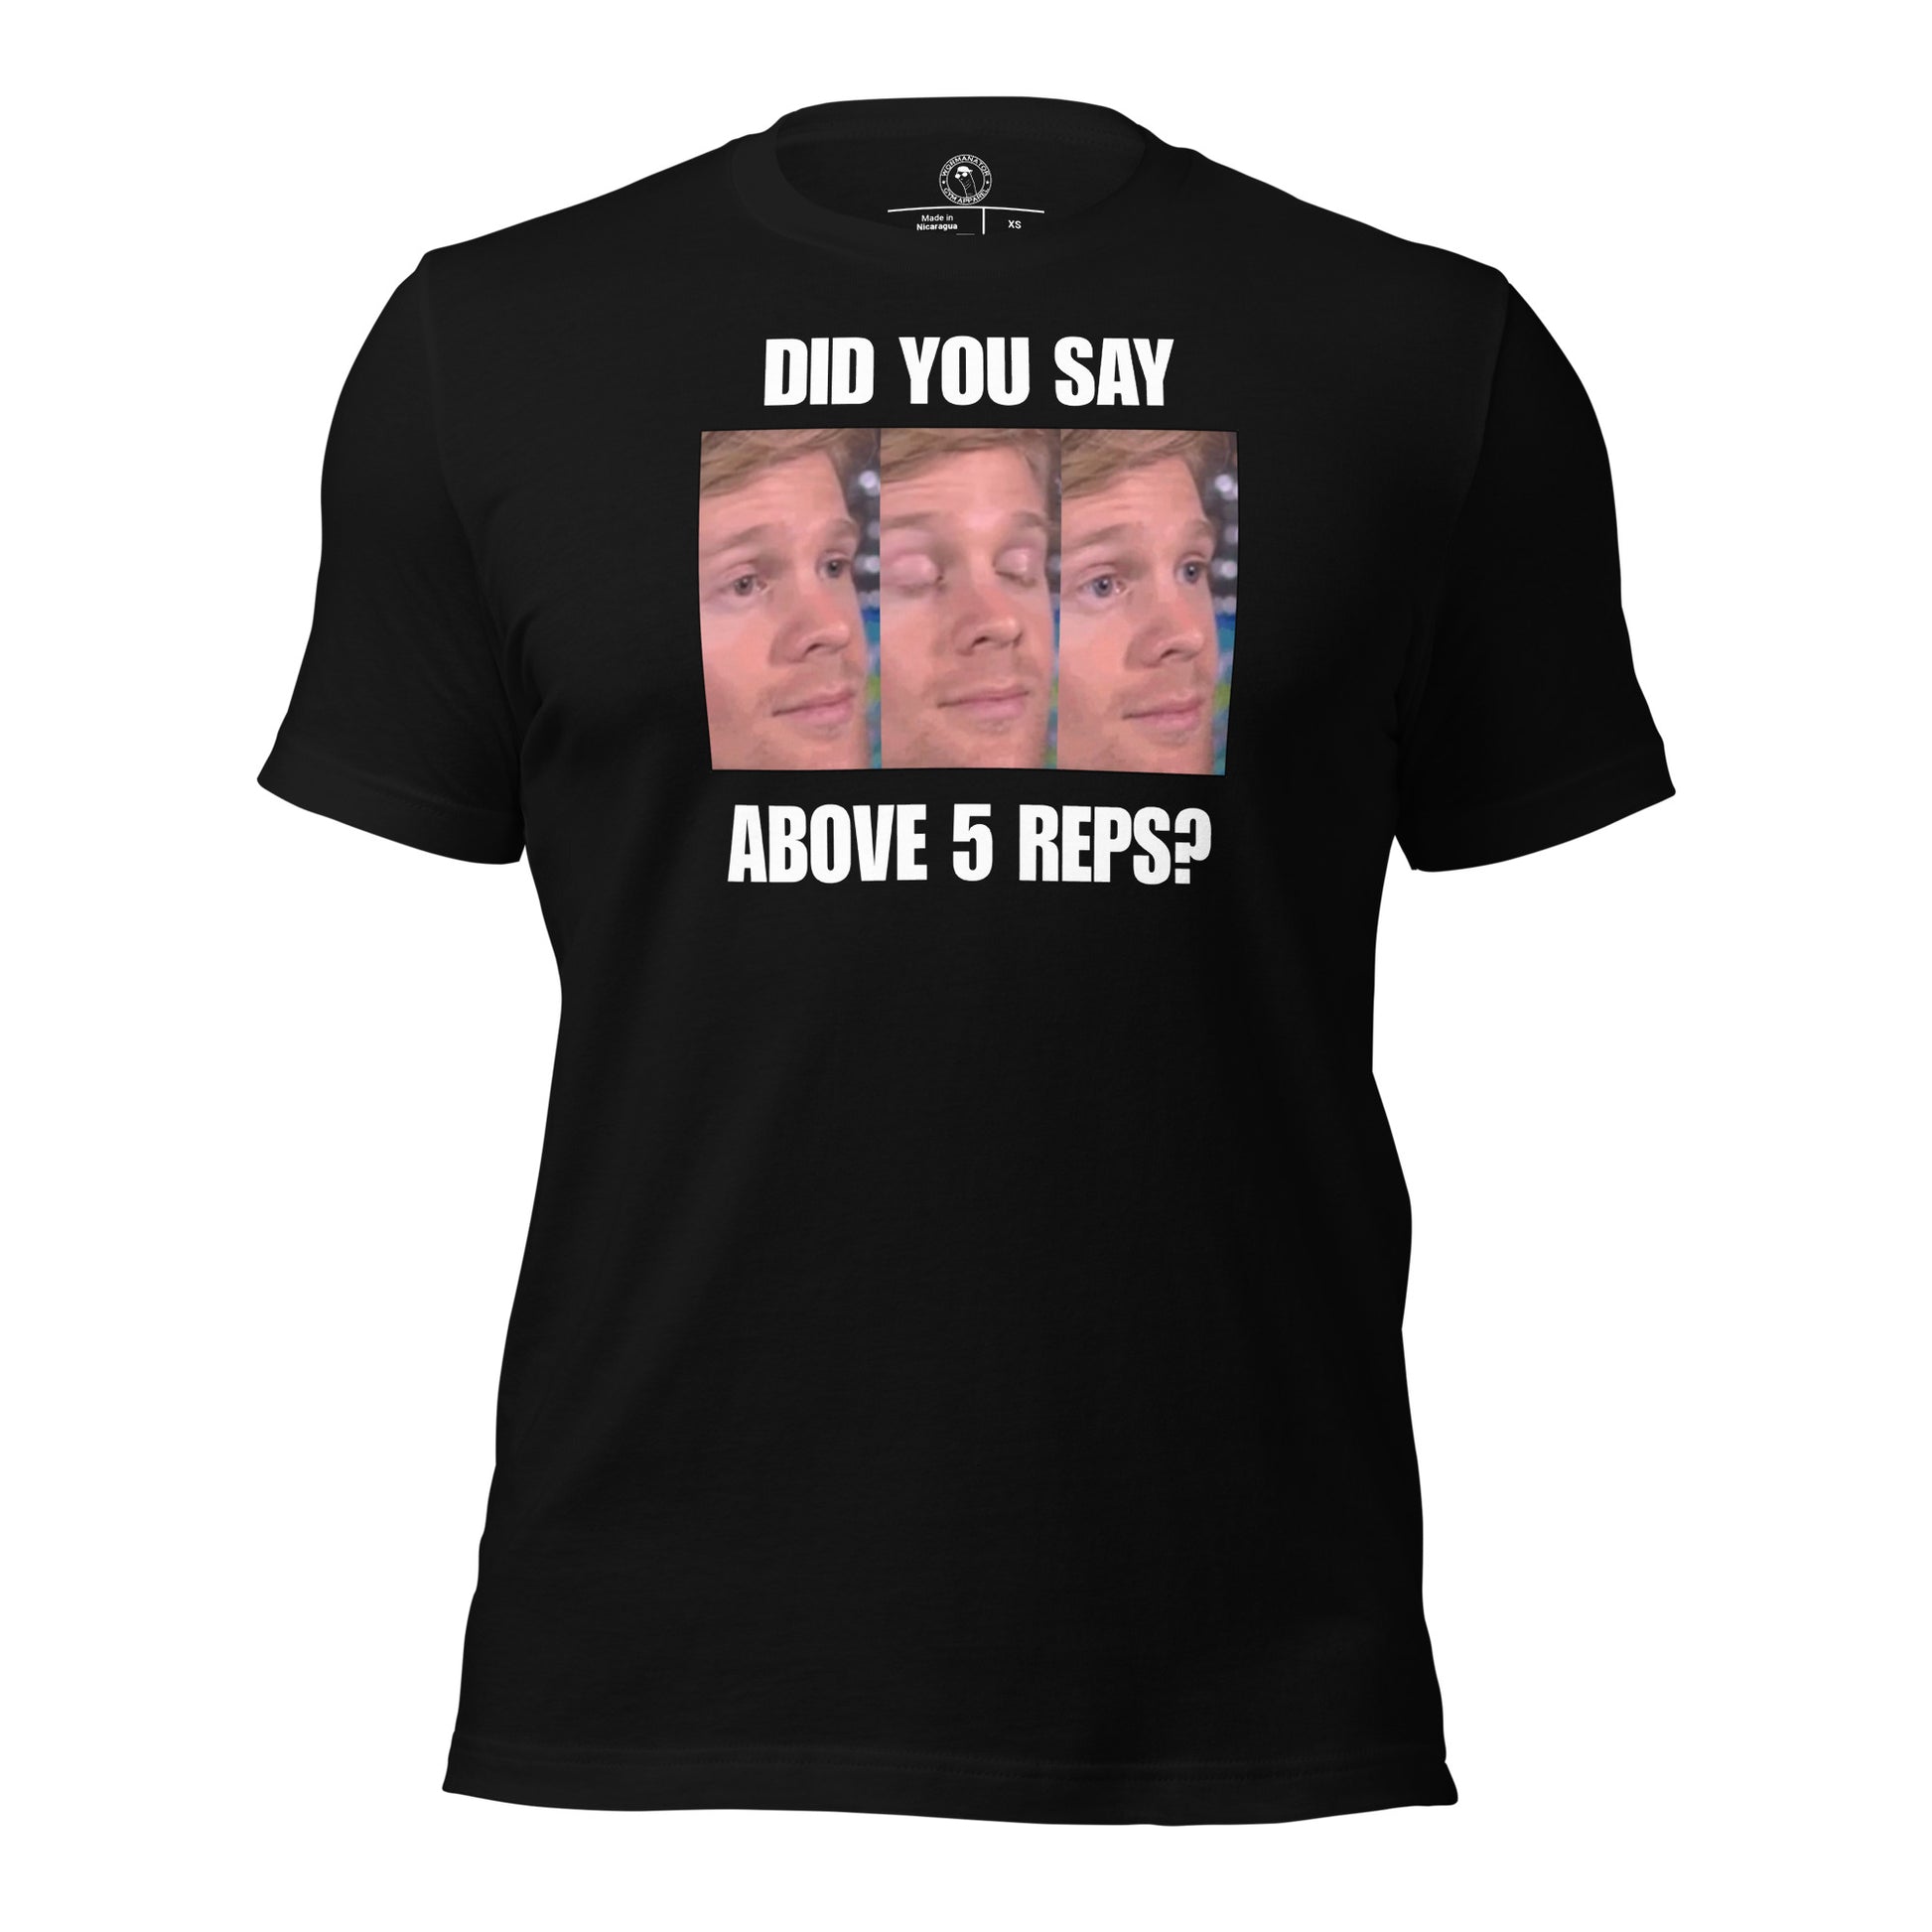 Above 5 Reps is Cardio Shirt in Black